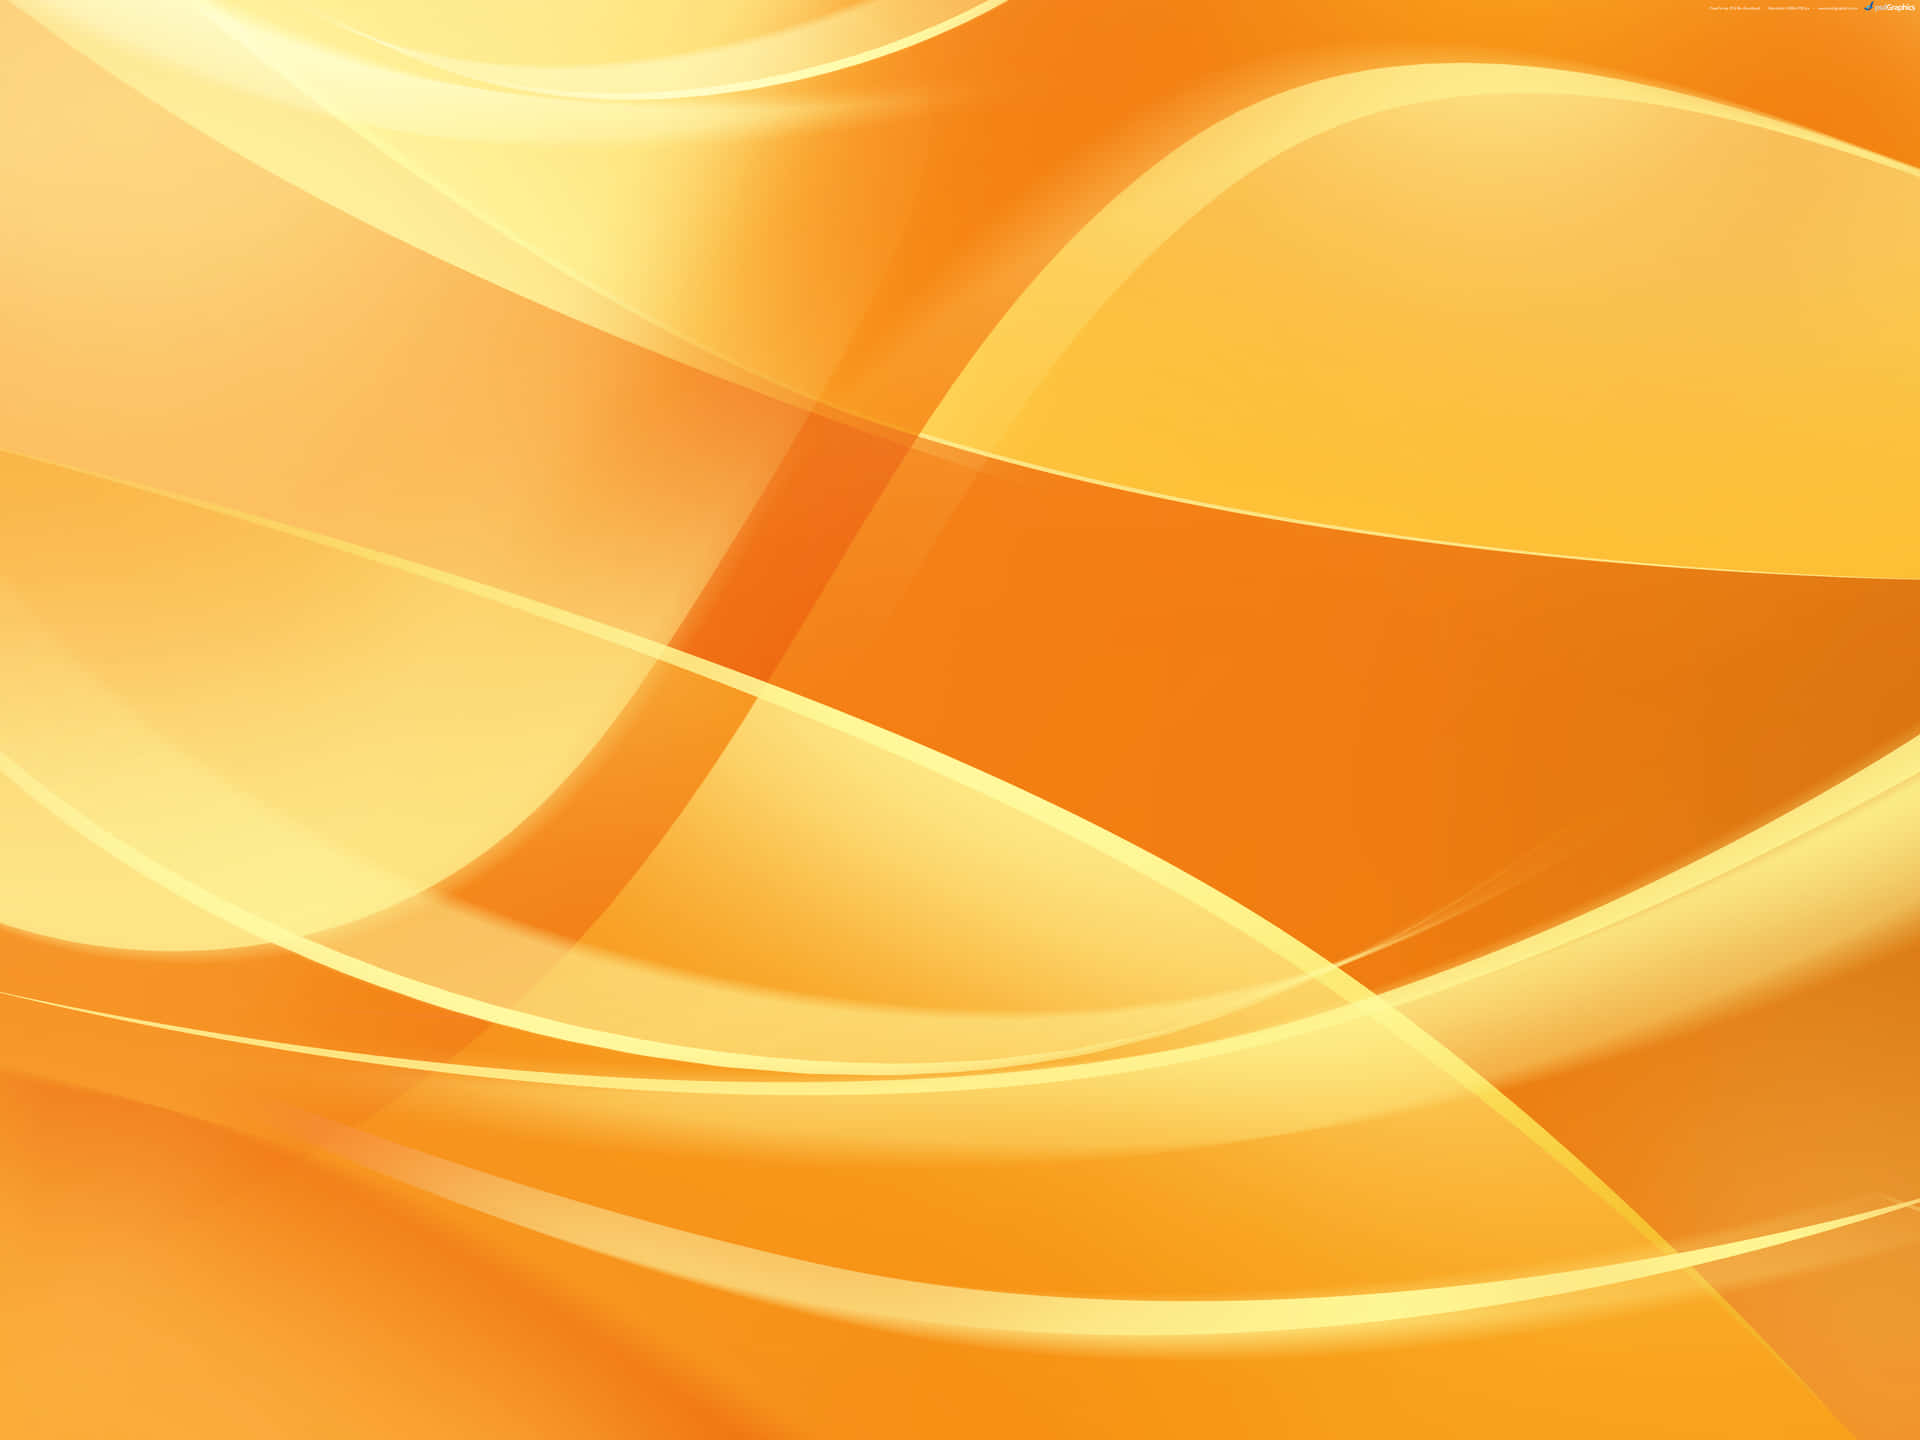 An Orange Abstract Background With Wavy Lines